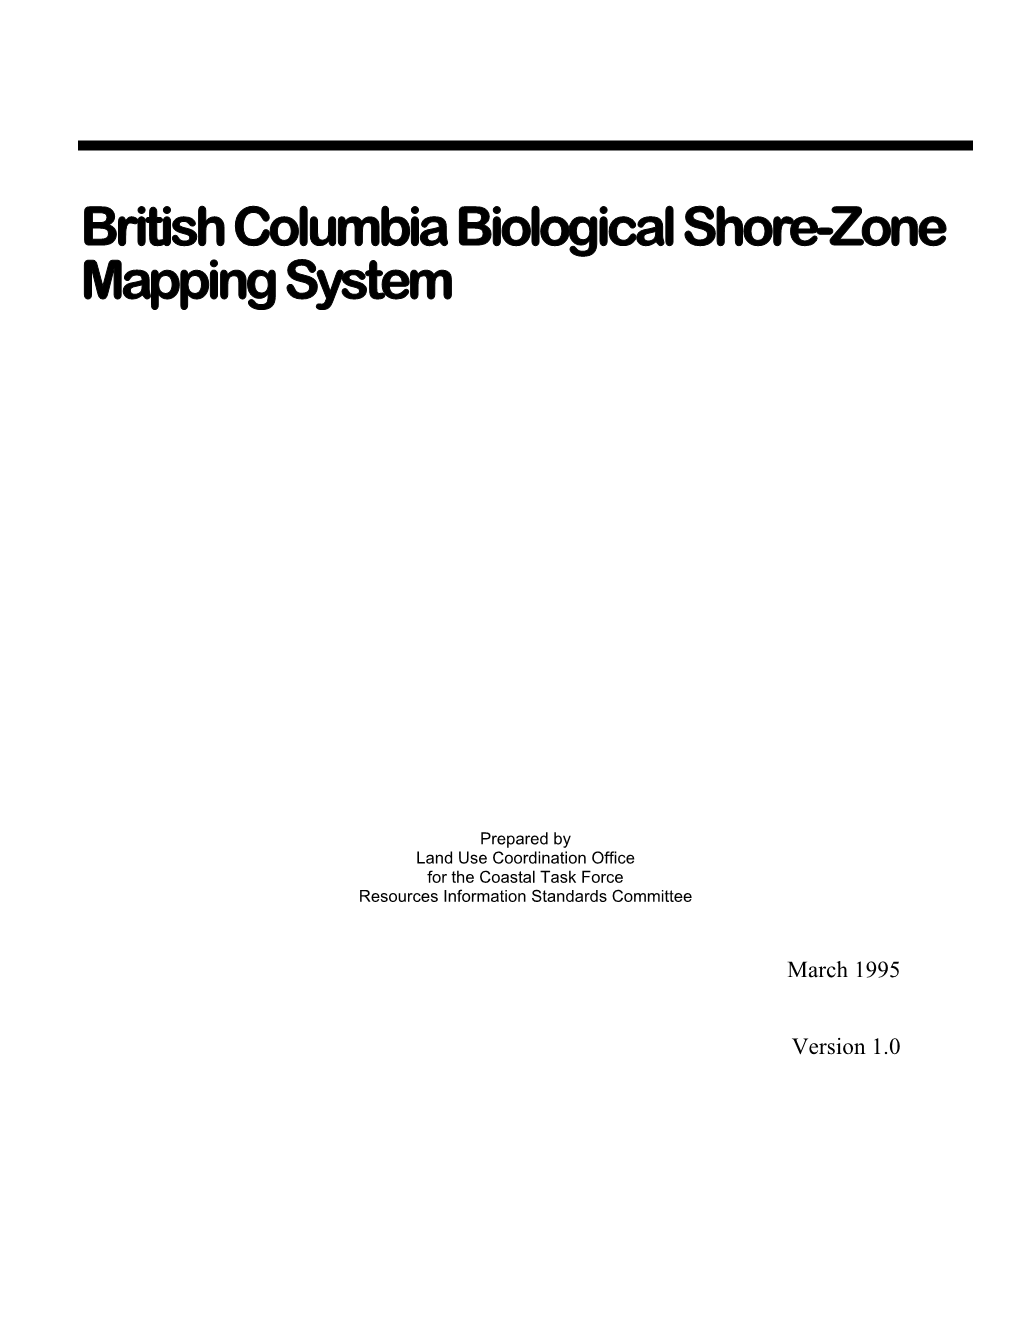 Biological Shore-Zone Mapping System